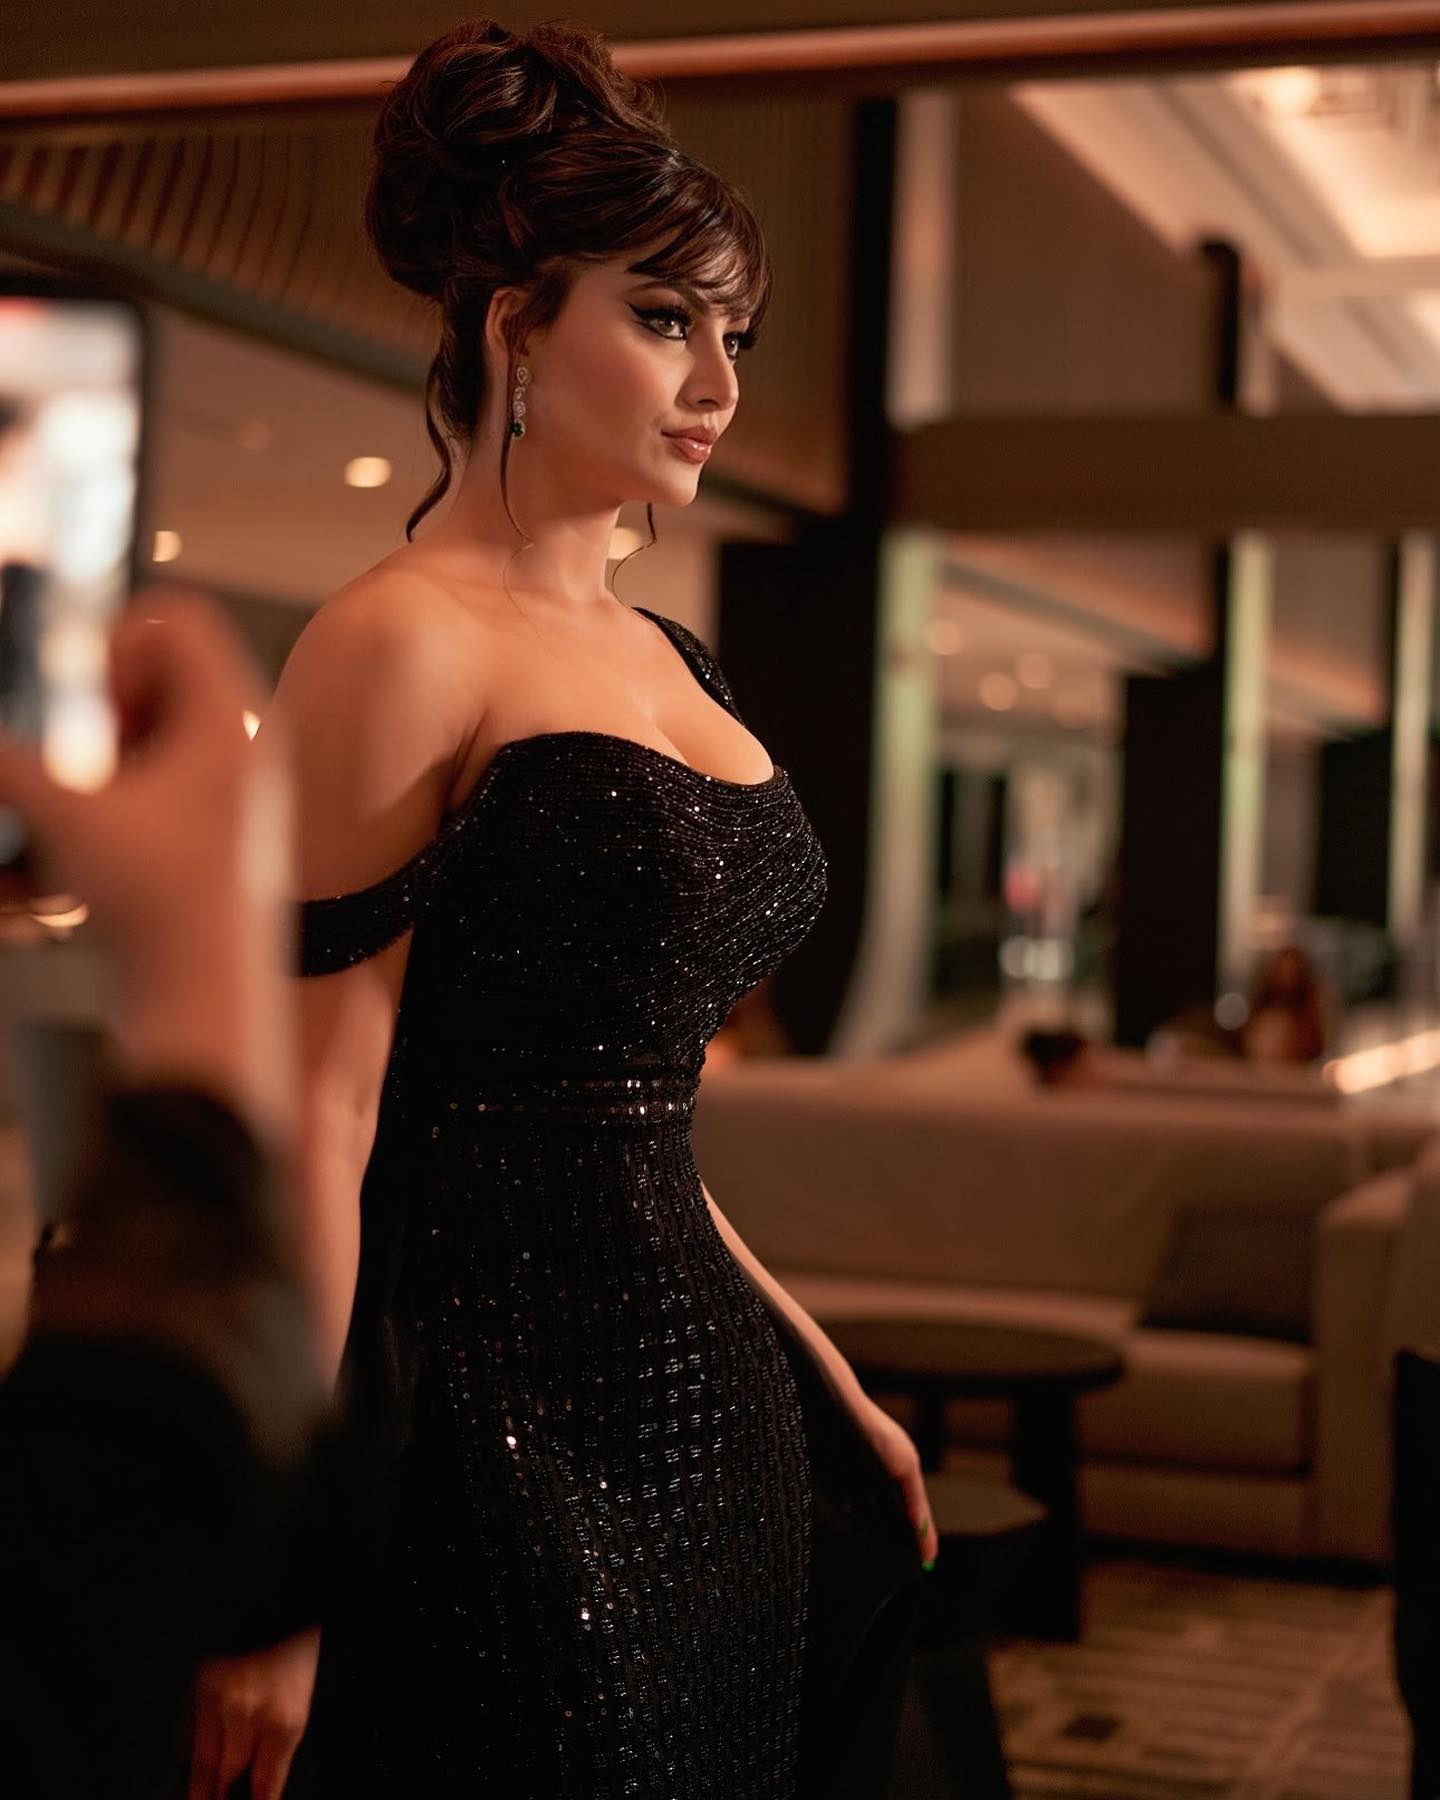 Photo by Urvashi Rautela on September May be an image of people gown and dress